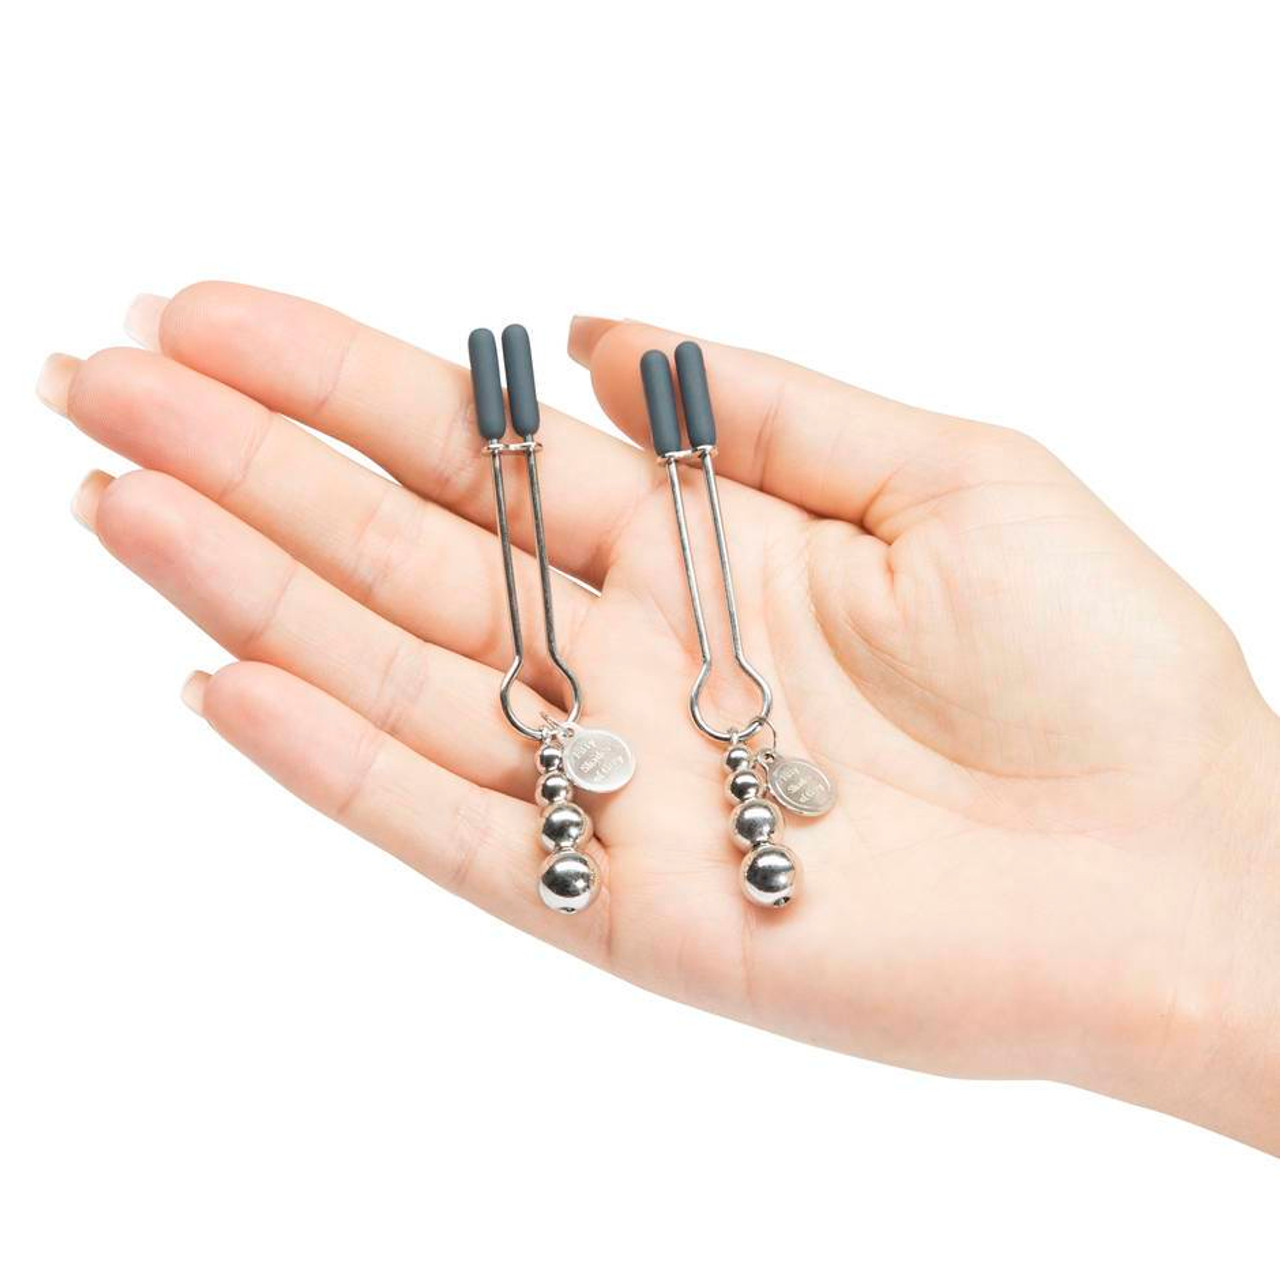 Buy the The Pinch Adjustable Tweezer-style Nipple Clamps - LoveHoney Fifty  Shades of Grey by EL